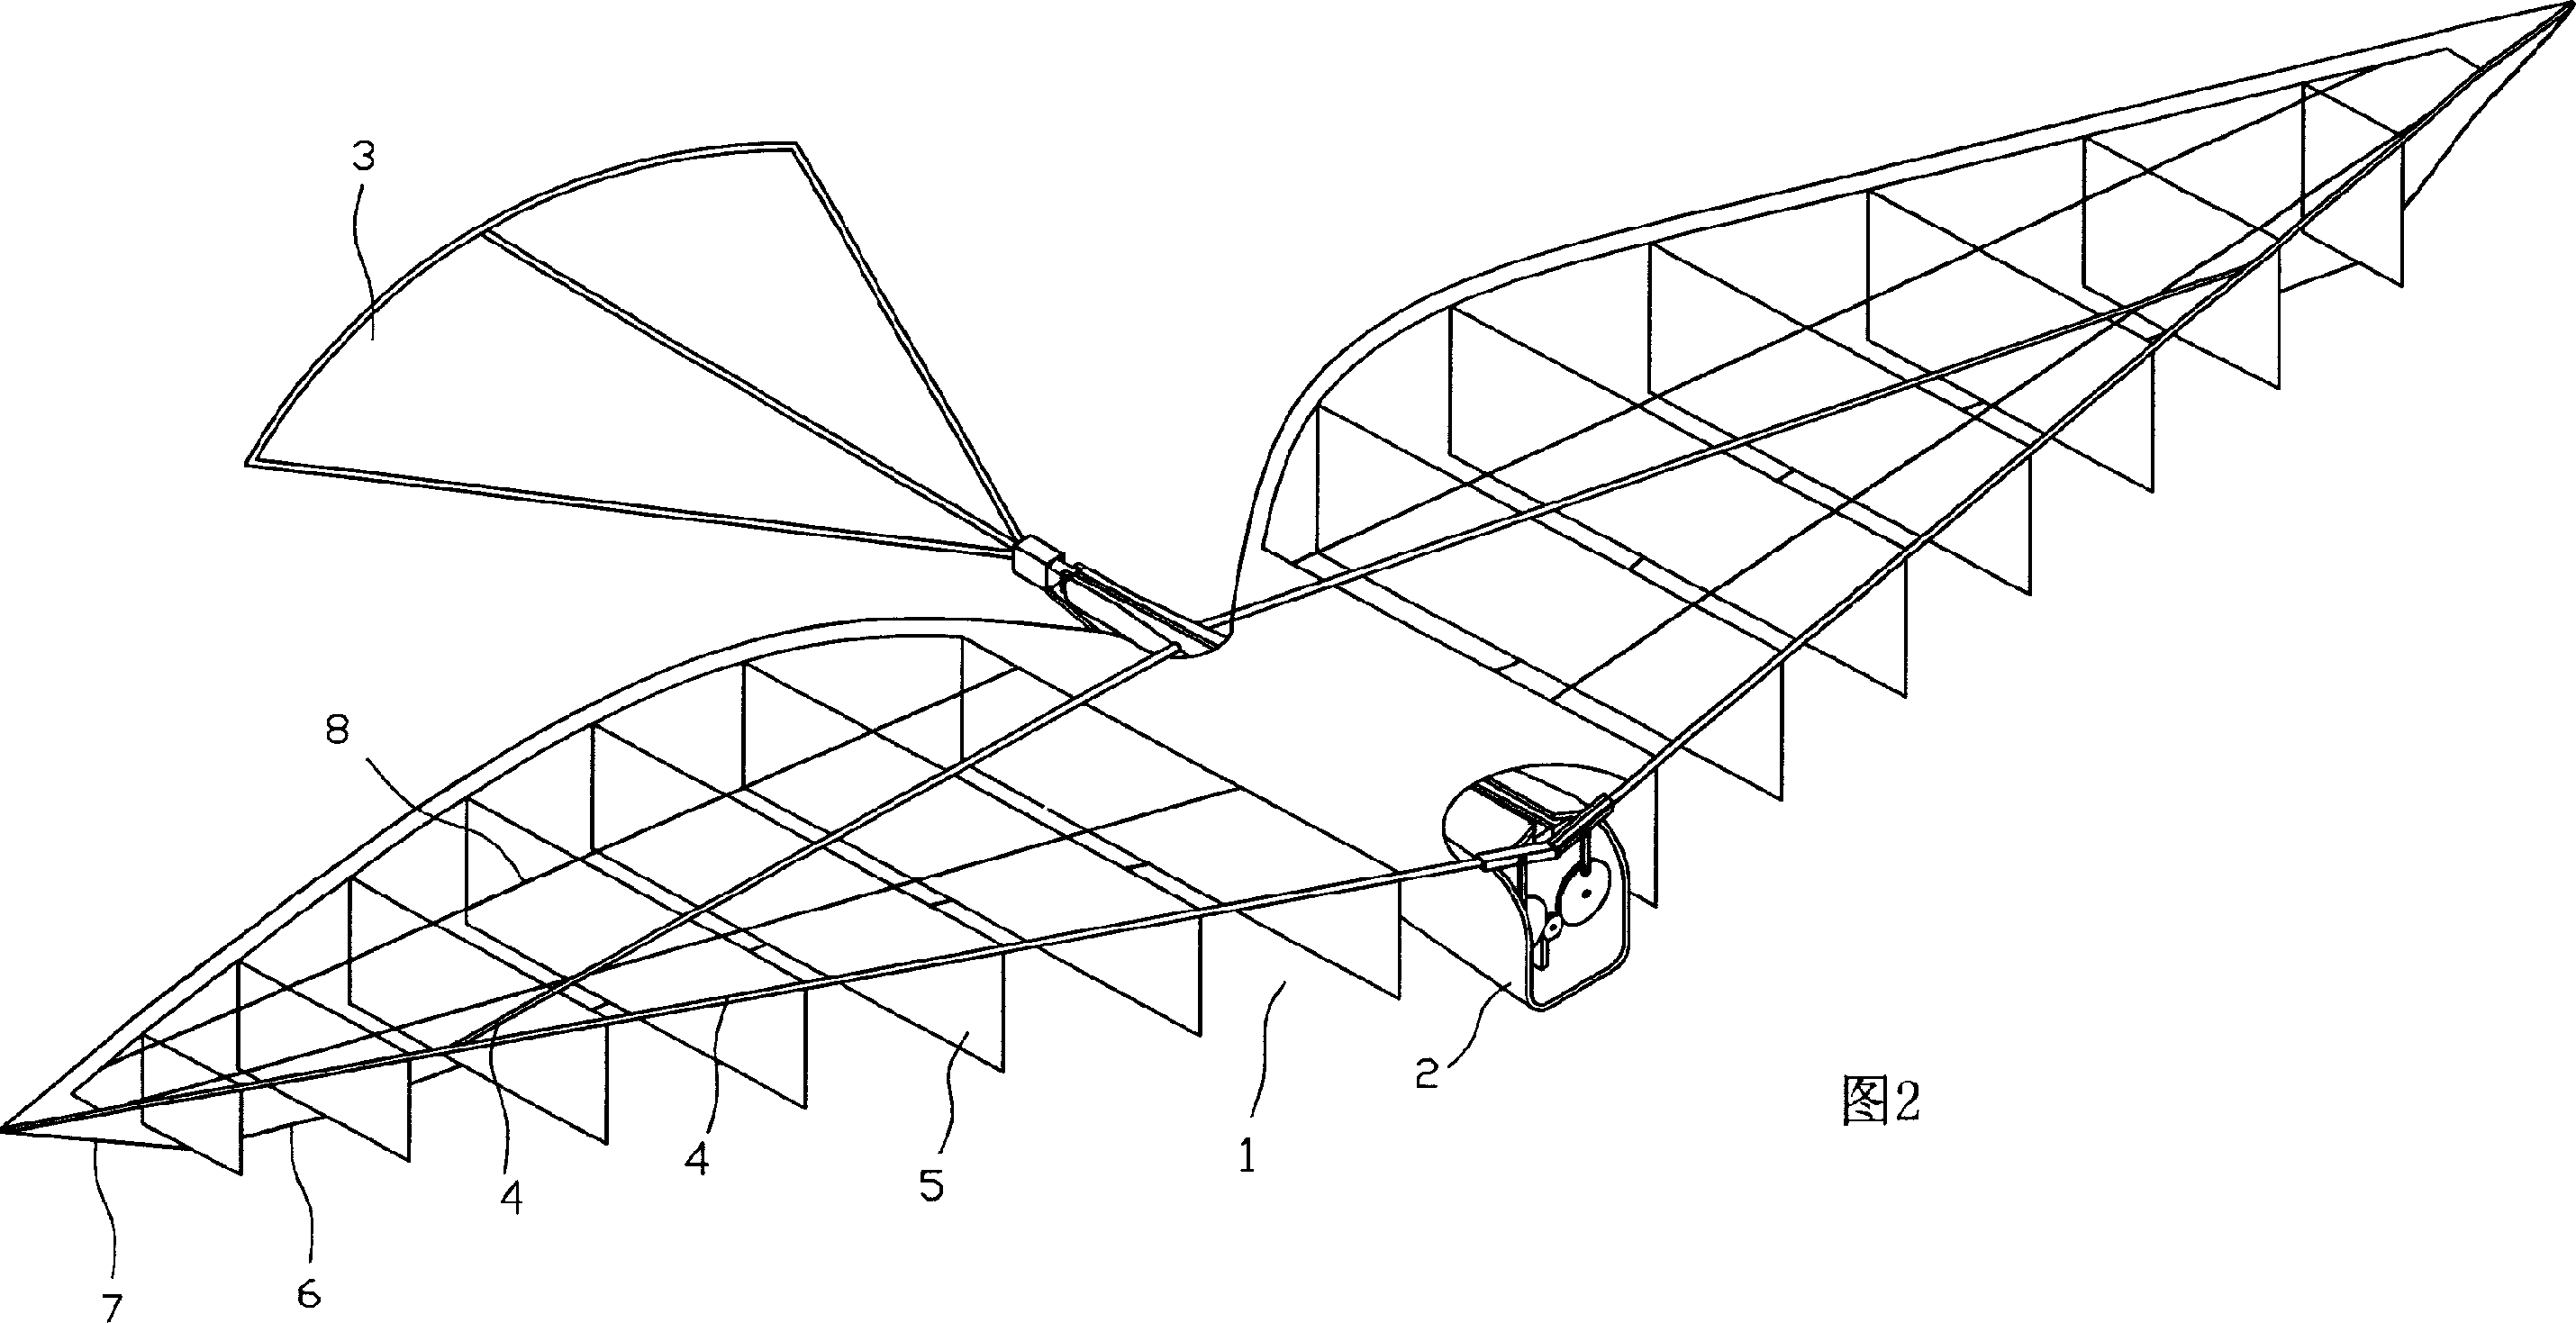 Wing structure for bionic aircraft